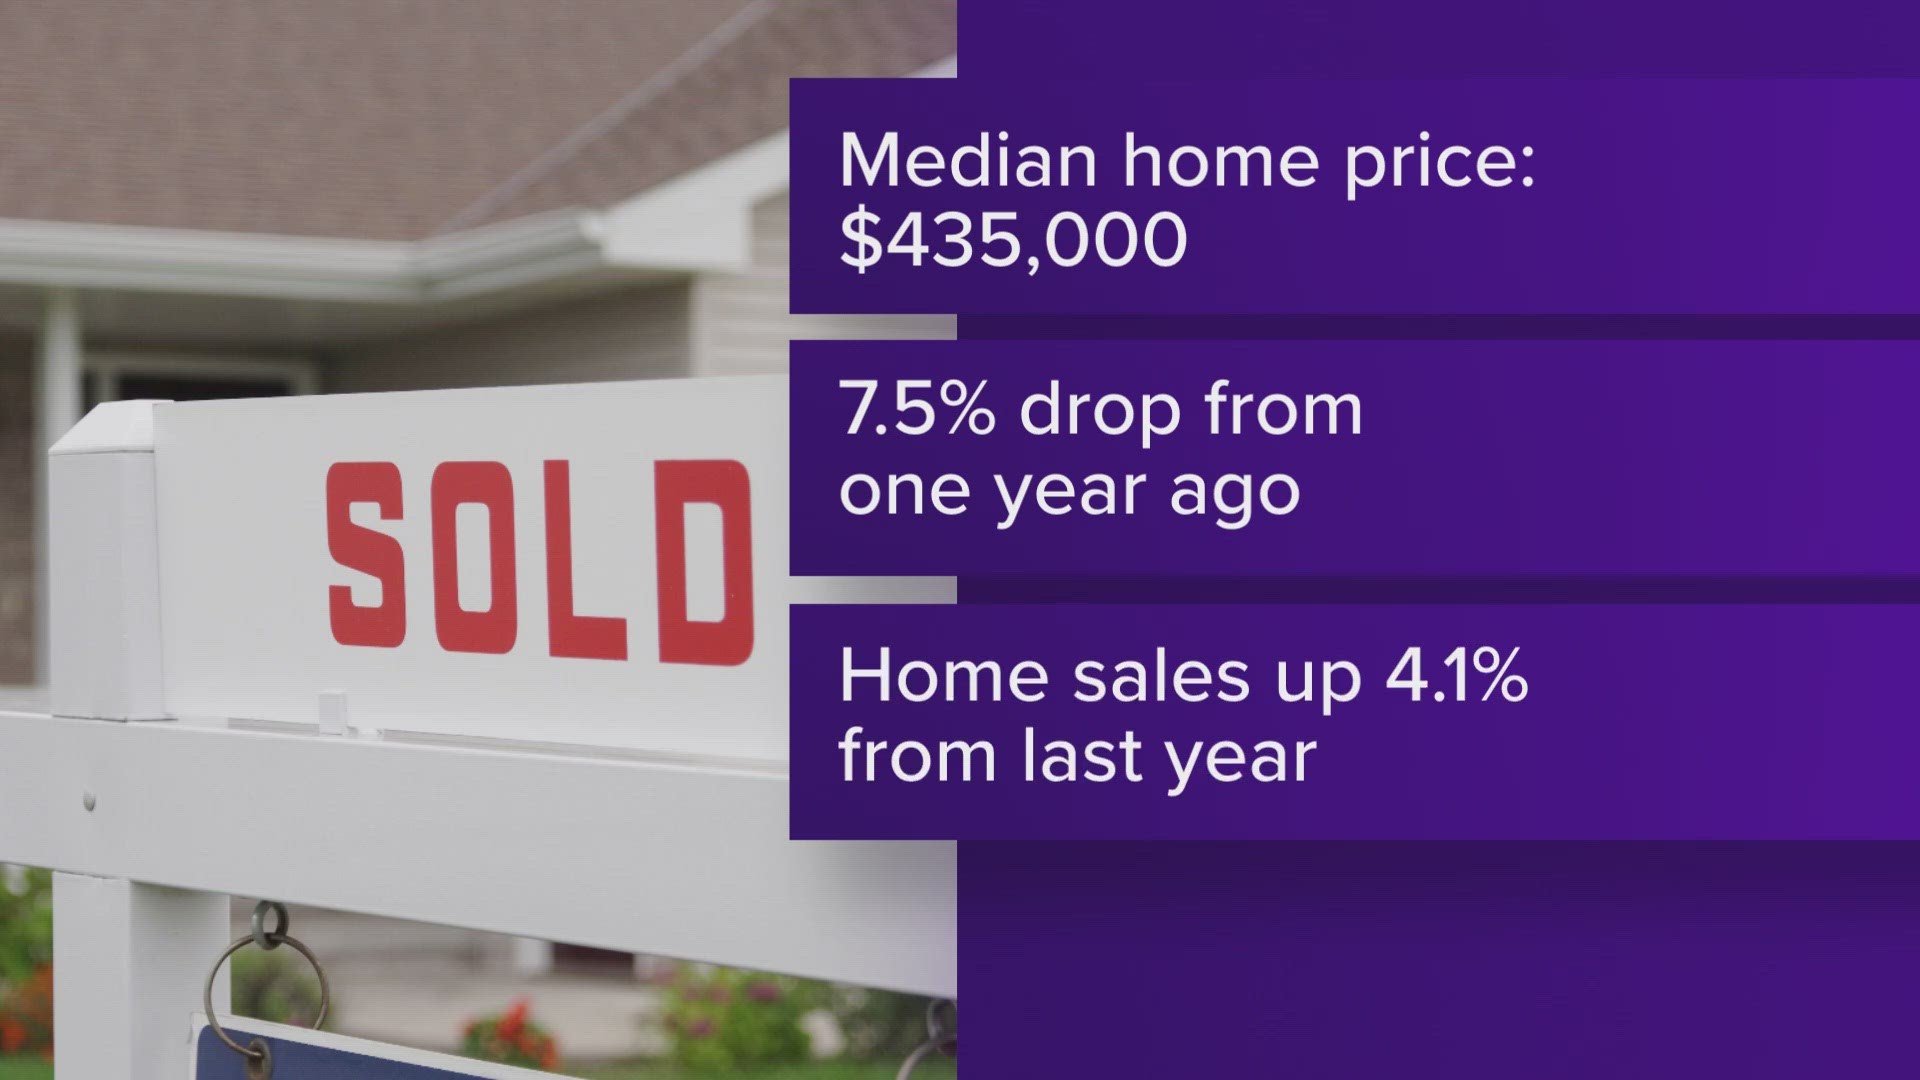 Home prices are dropping in Central Texas.